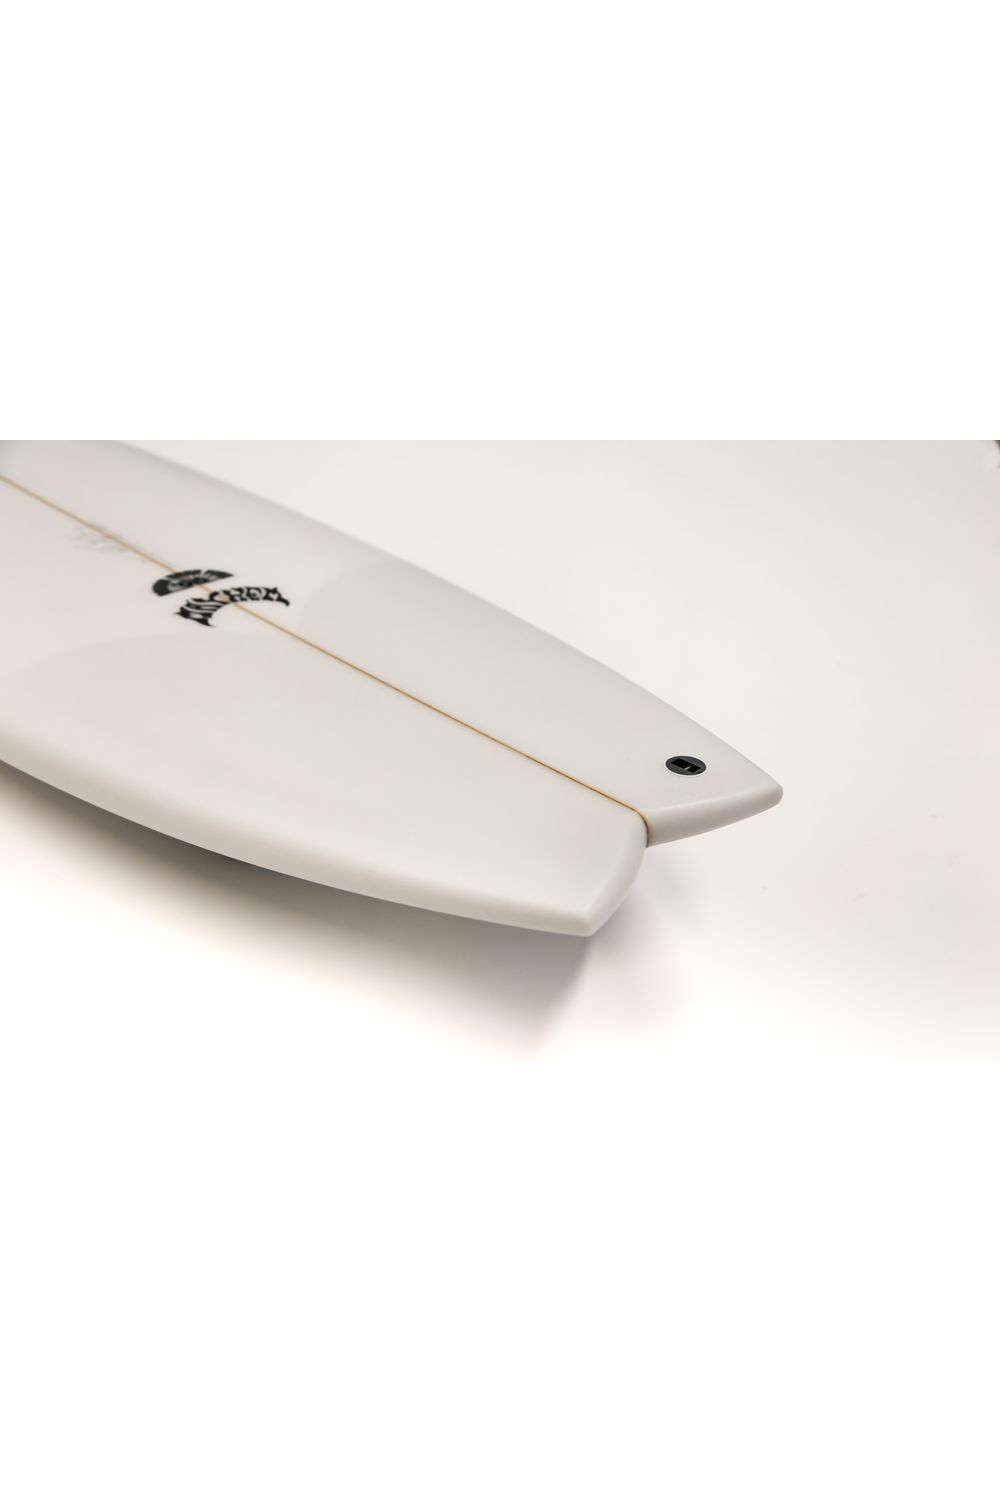 Lost Round Nose Fish 96, 5'10 Surfboard 33.50L PU Futures 3 Fins